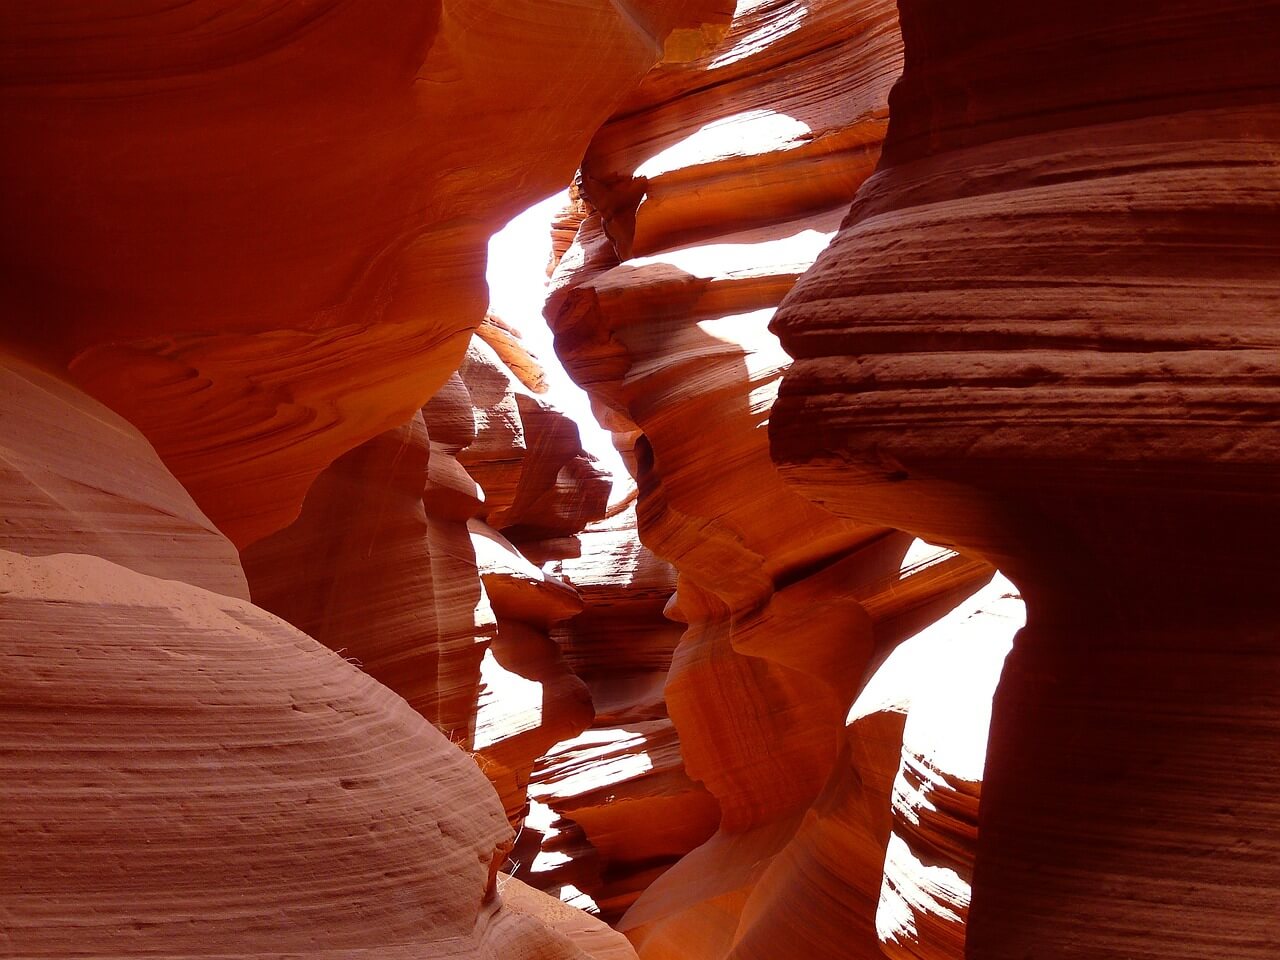 antelope canyon, page, sandstone